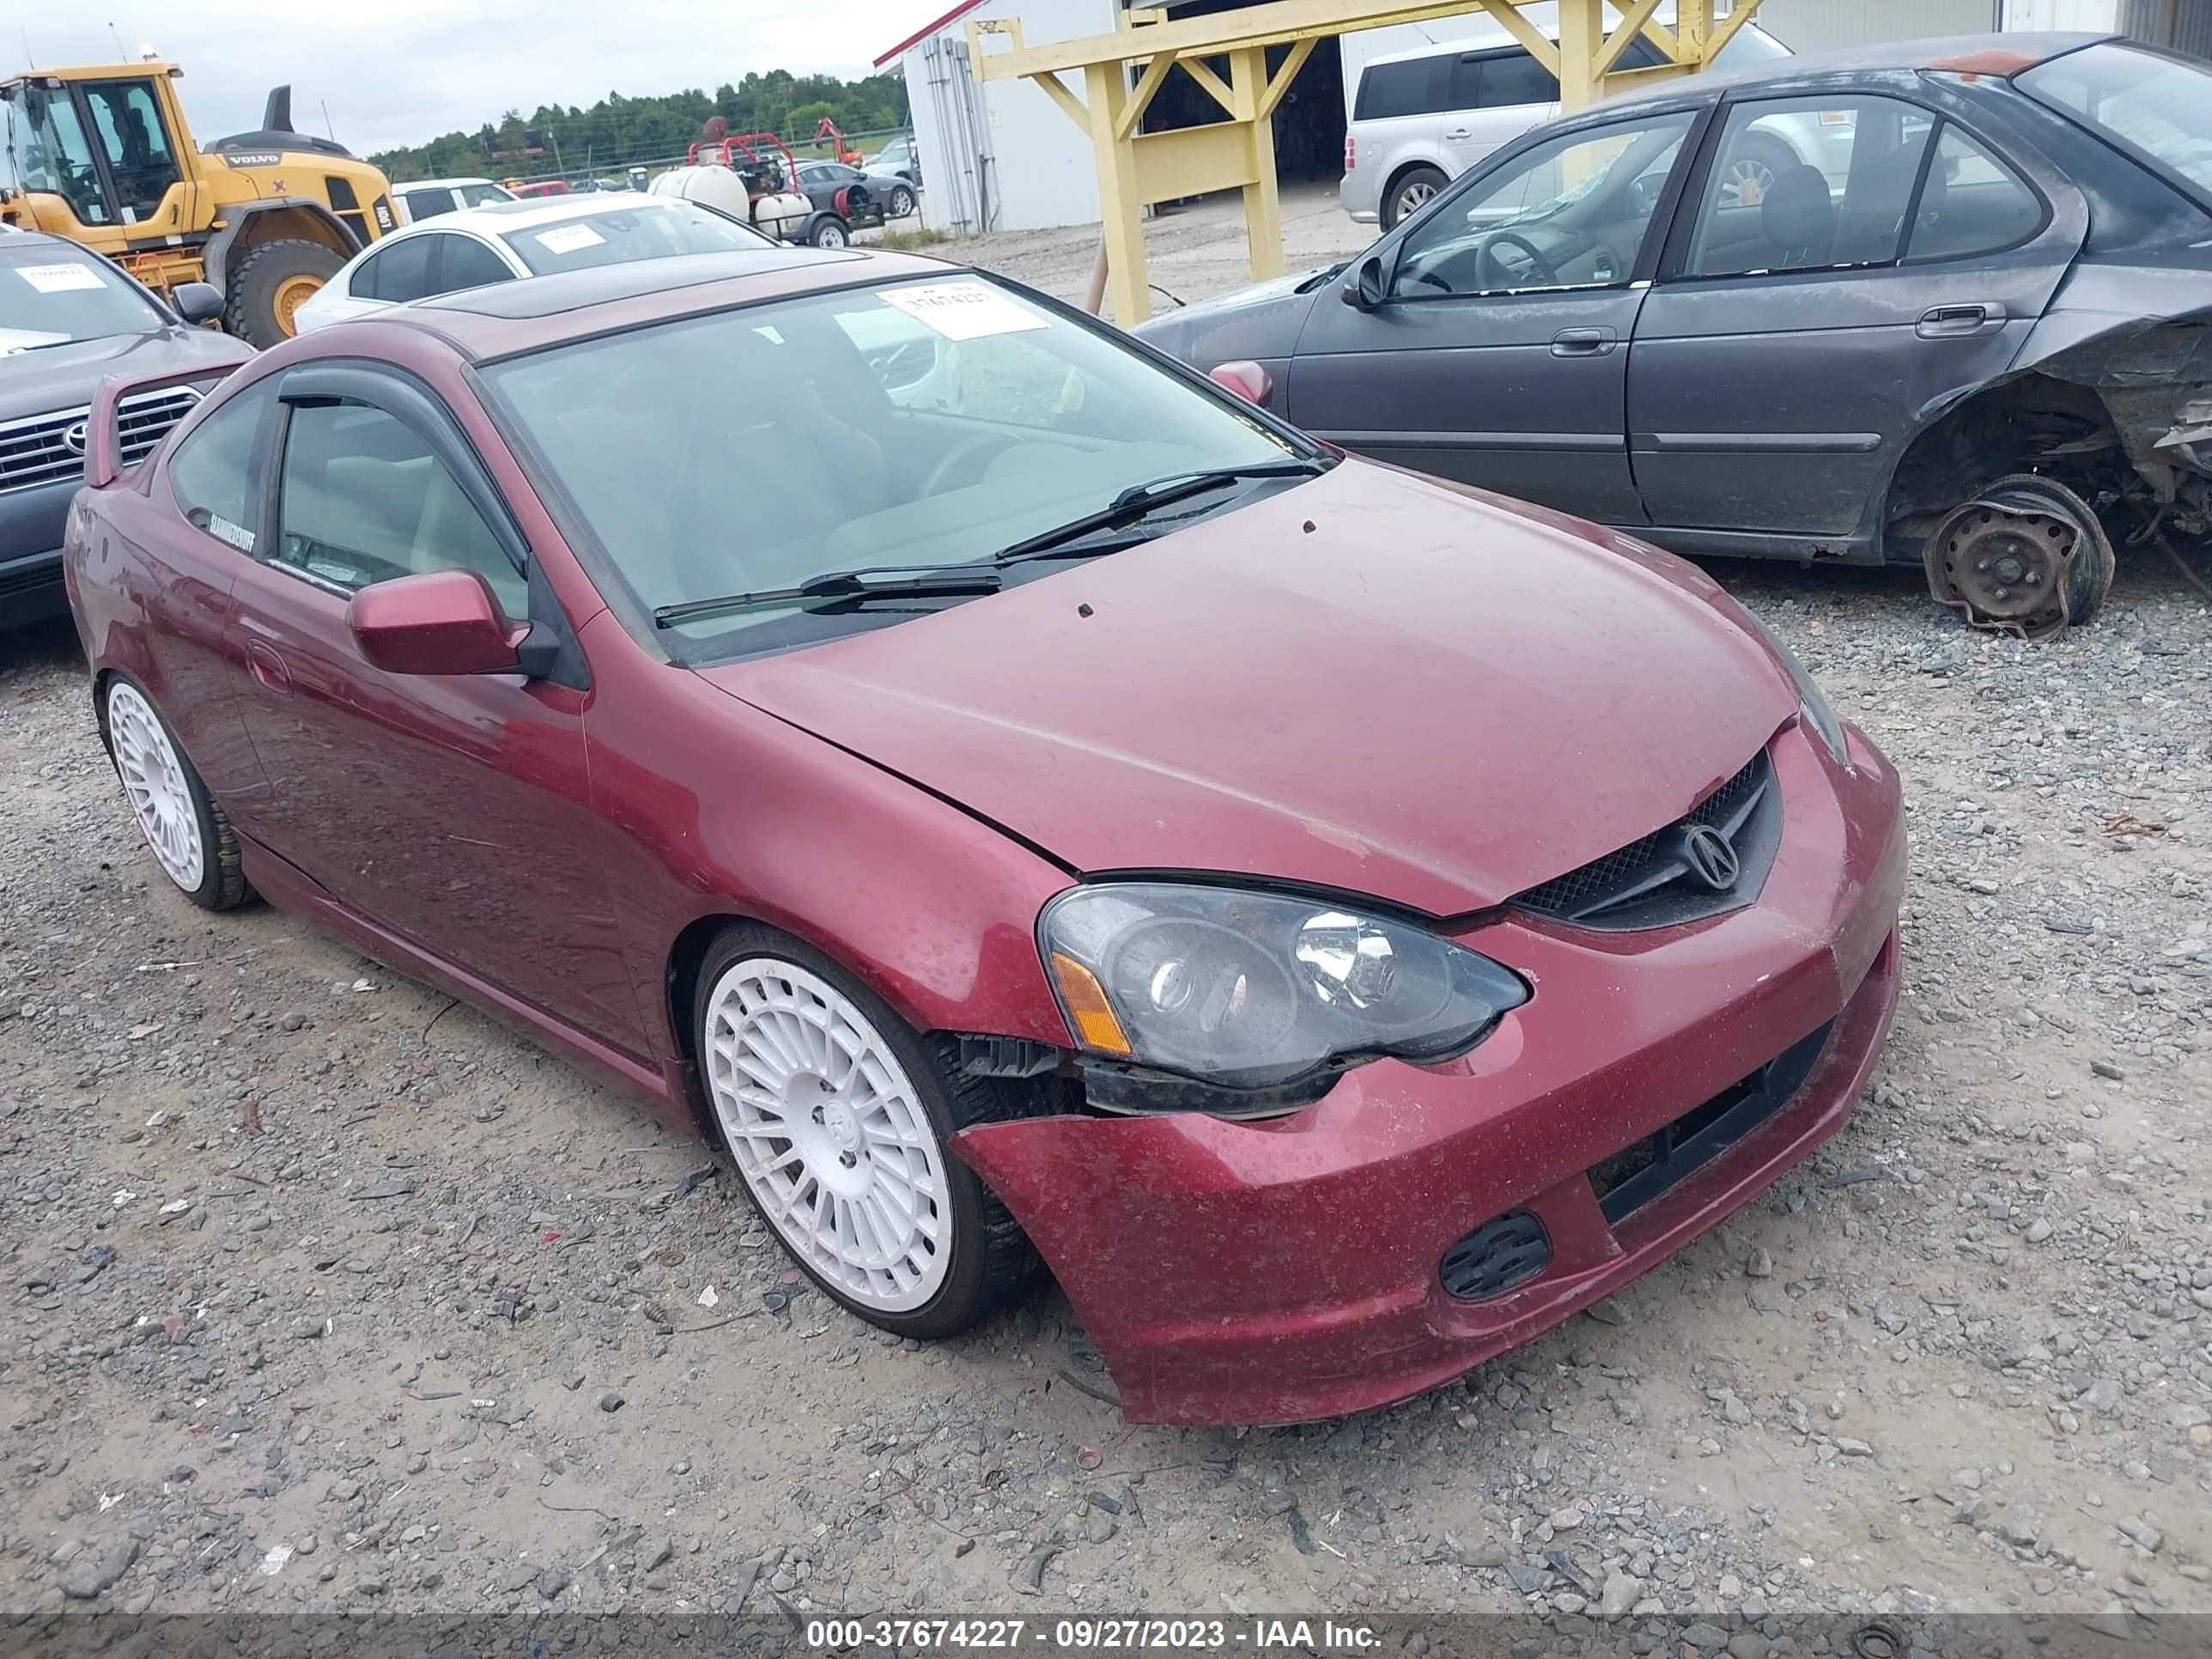 VIN: JH4DC54853S002341 - acura rsx